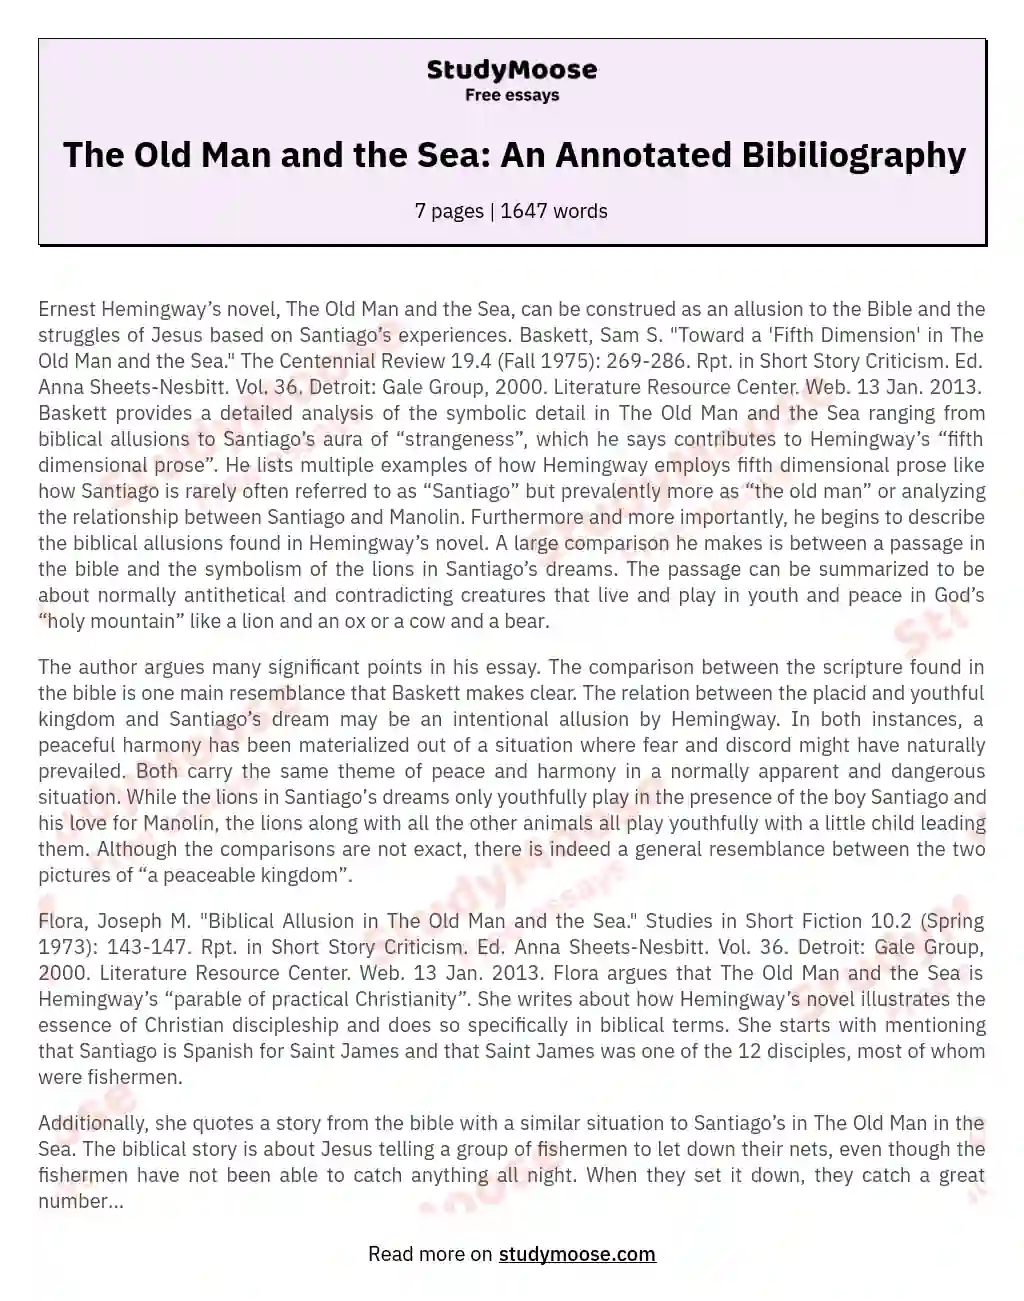 The Old Man and the Sea: An Annotated Bibiliography essay